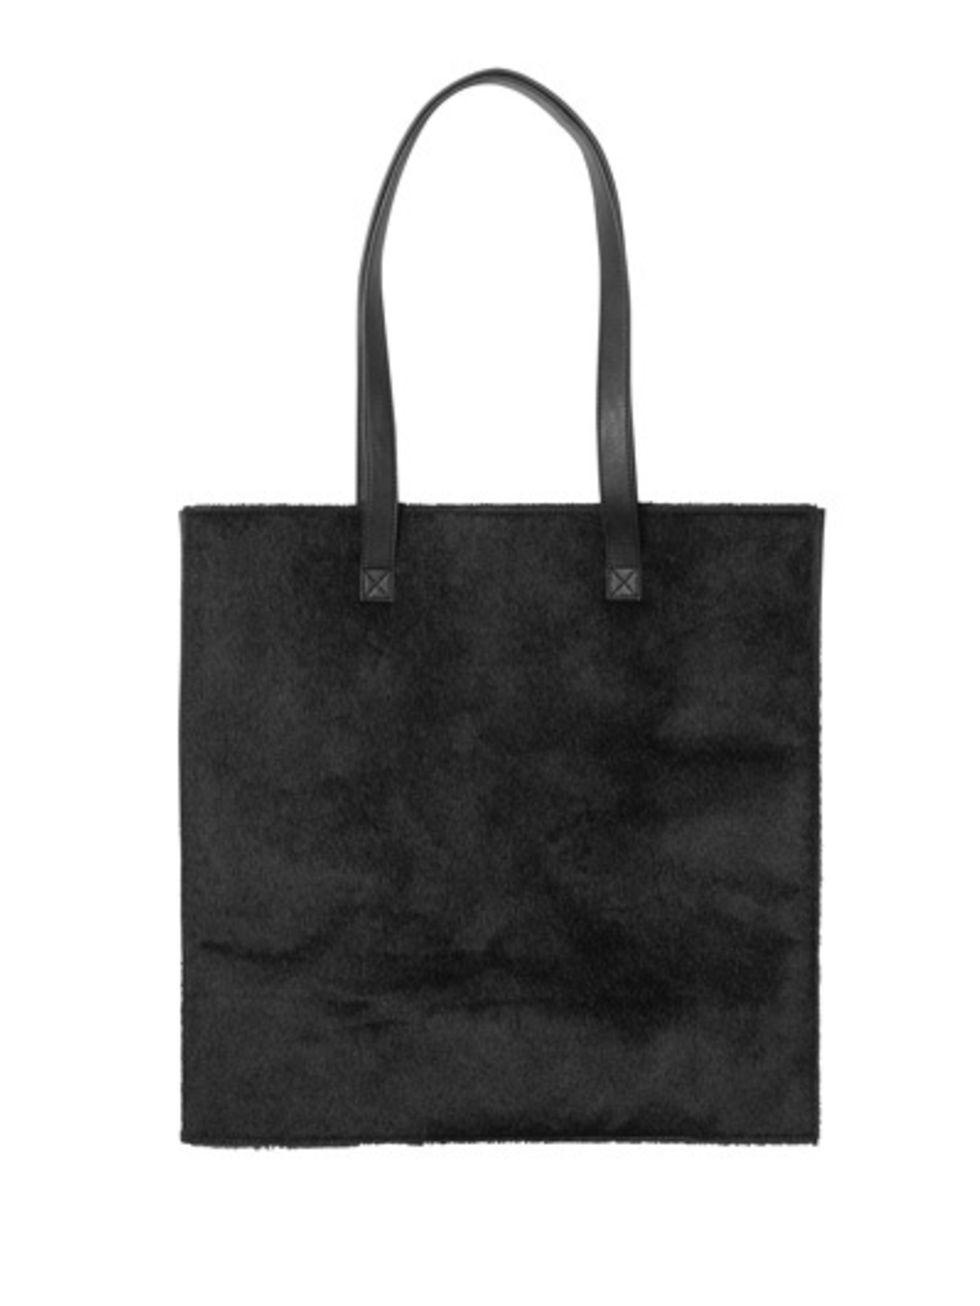 Product, Bag, White, Style, Fashion accessory, Luggage and bags, Fashion, Shoulder bag, Black, Monochrome photography, 